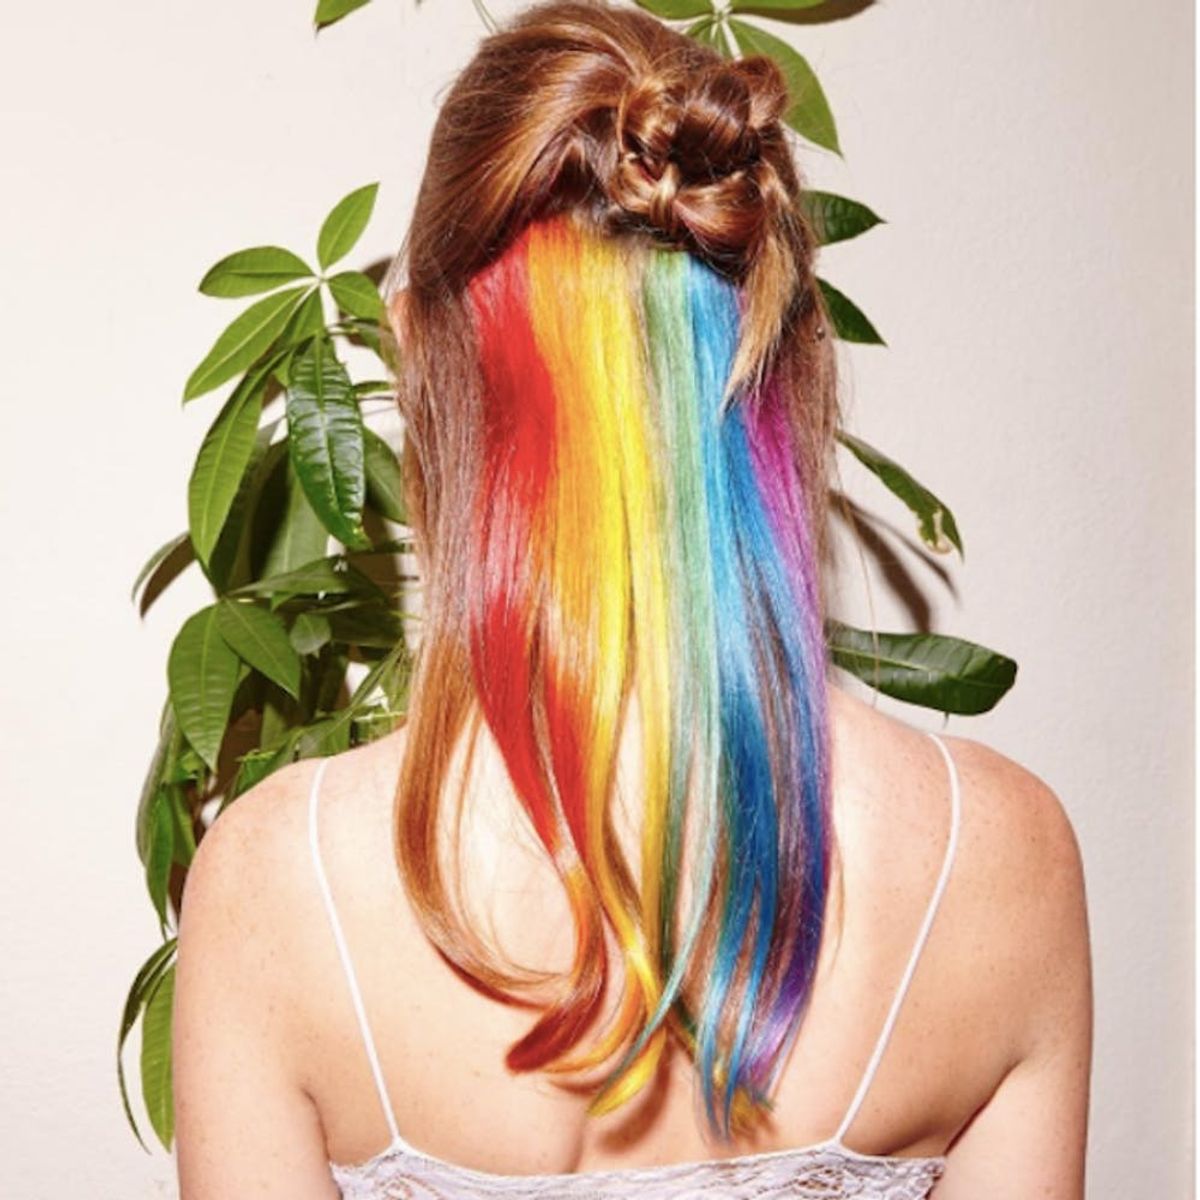 Hidden Rainbow Hair Is the Trend You Never Knew You Always Wanted